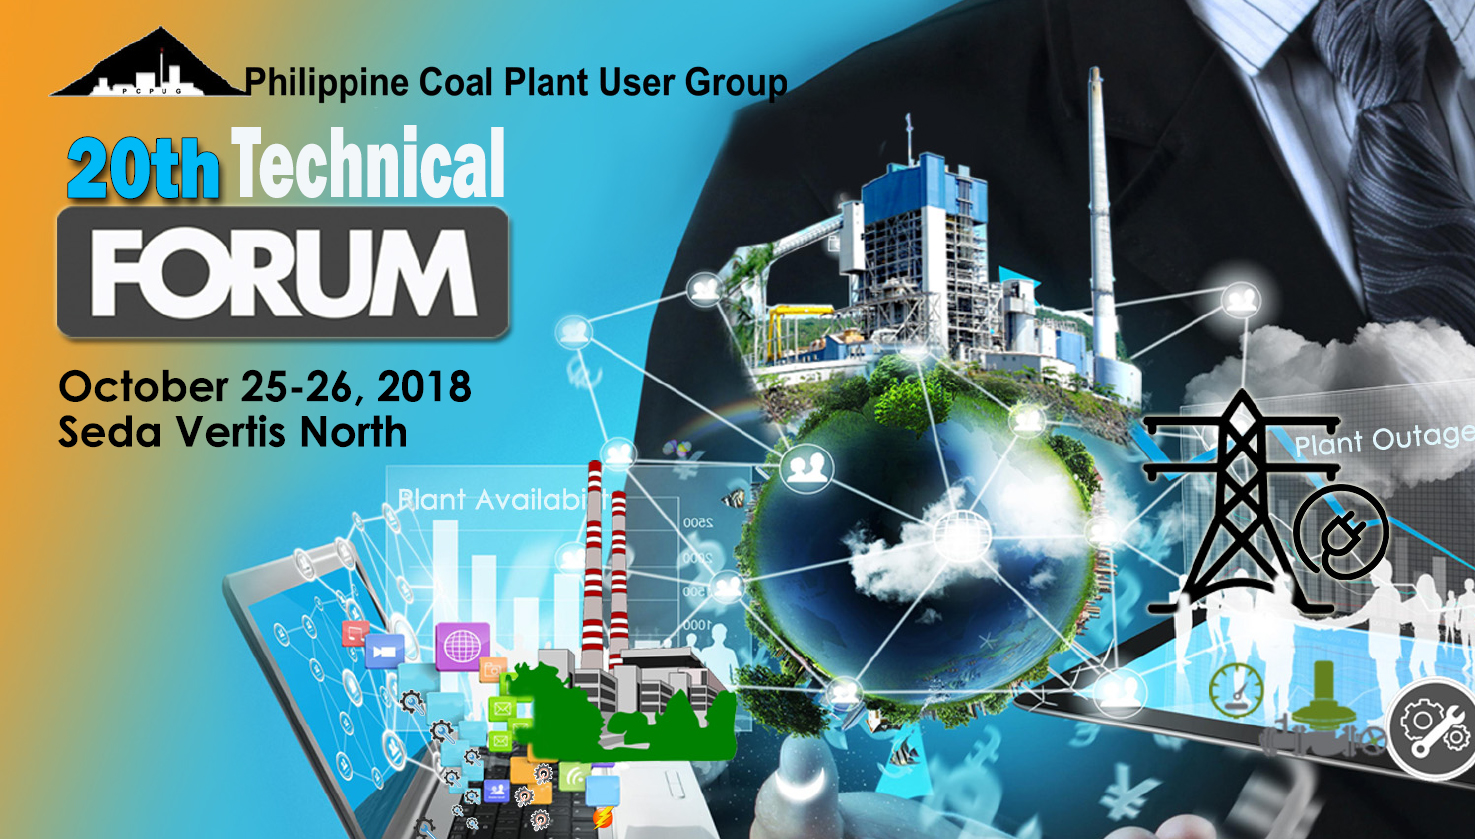 Logo for Philippine Coal Plant User Group and event dates